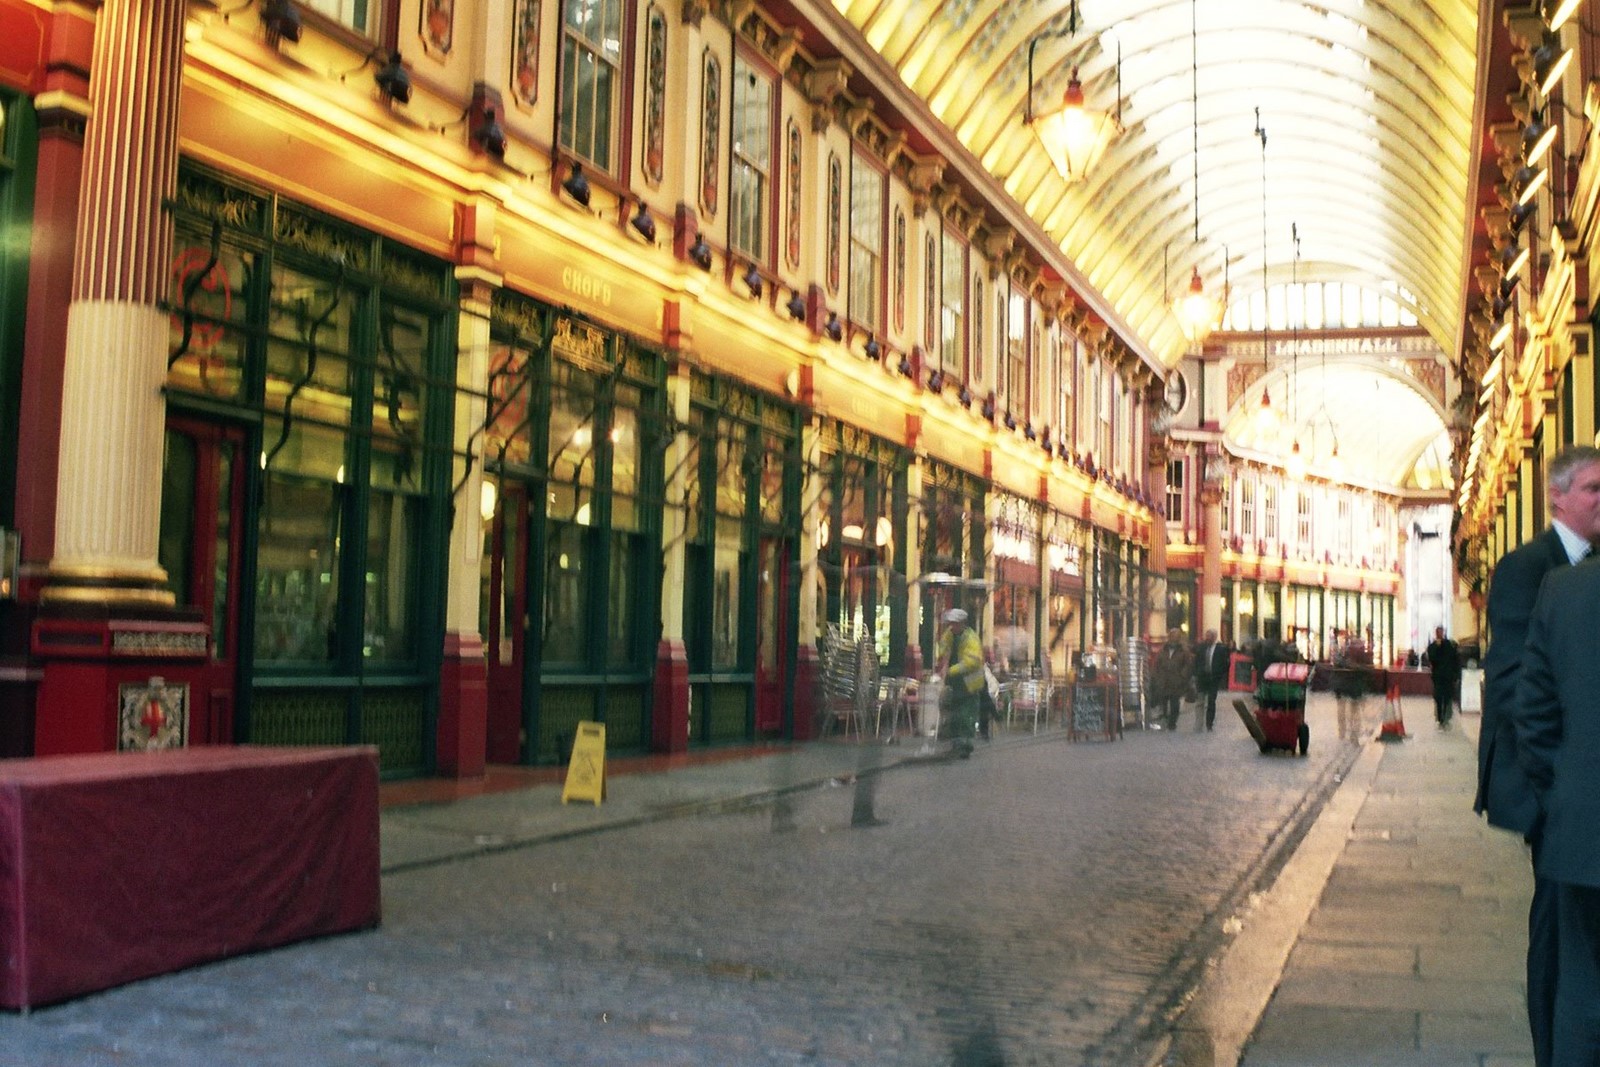 The Leadenhall Market in Central London